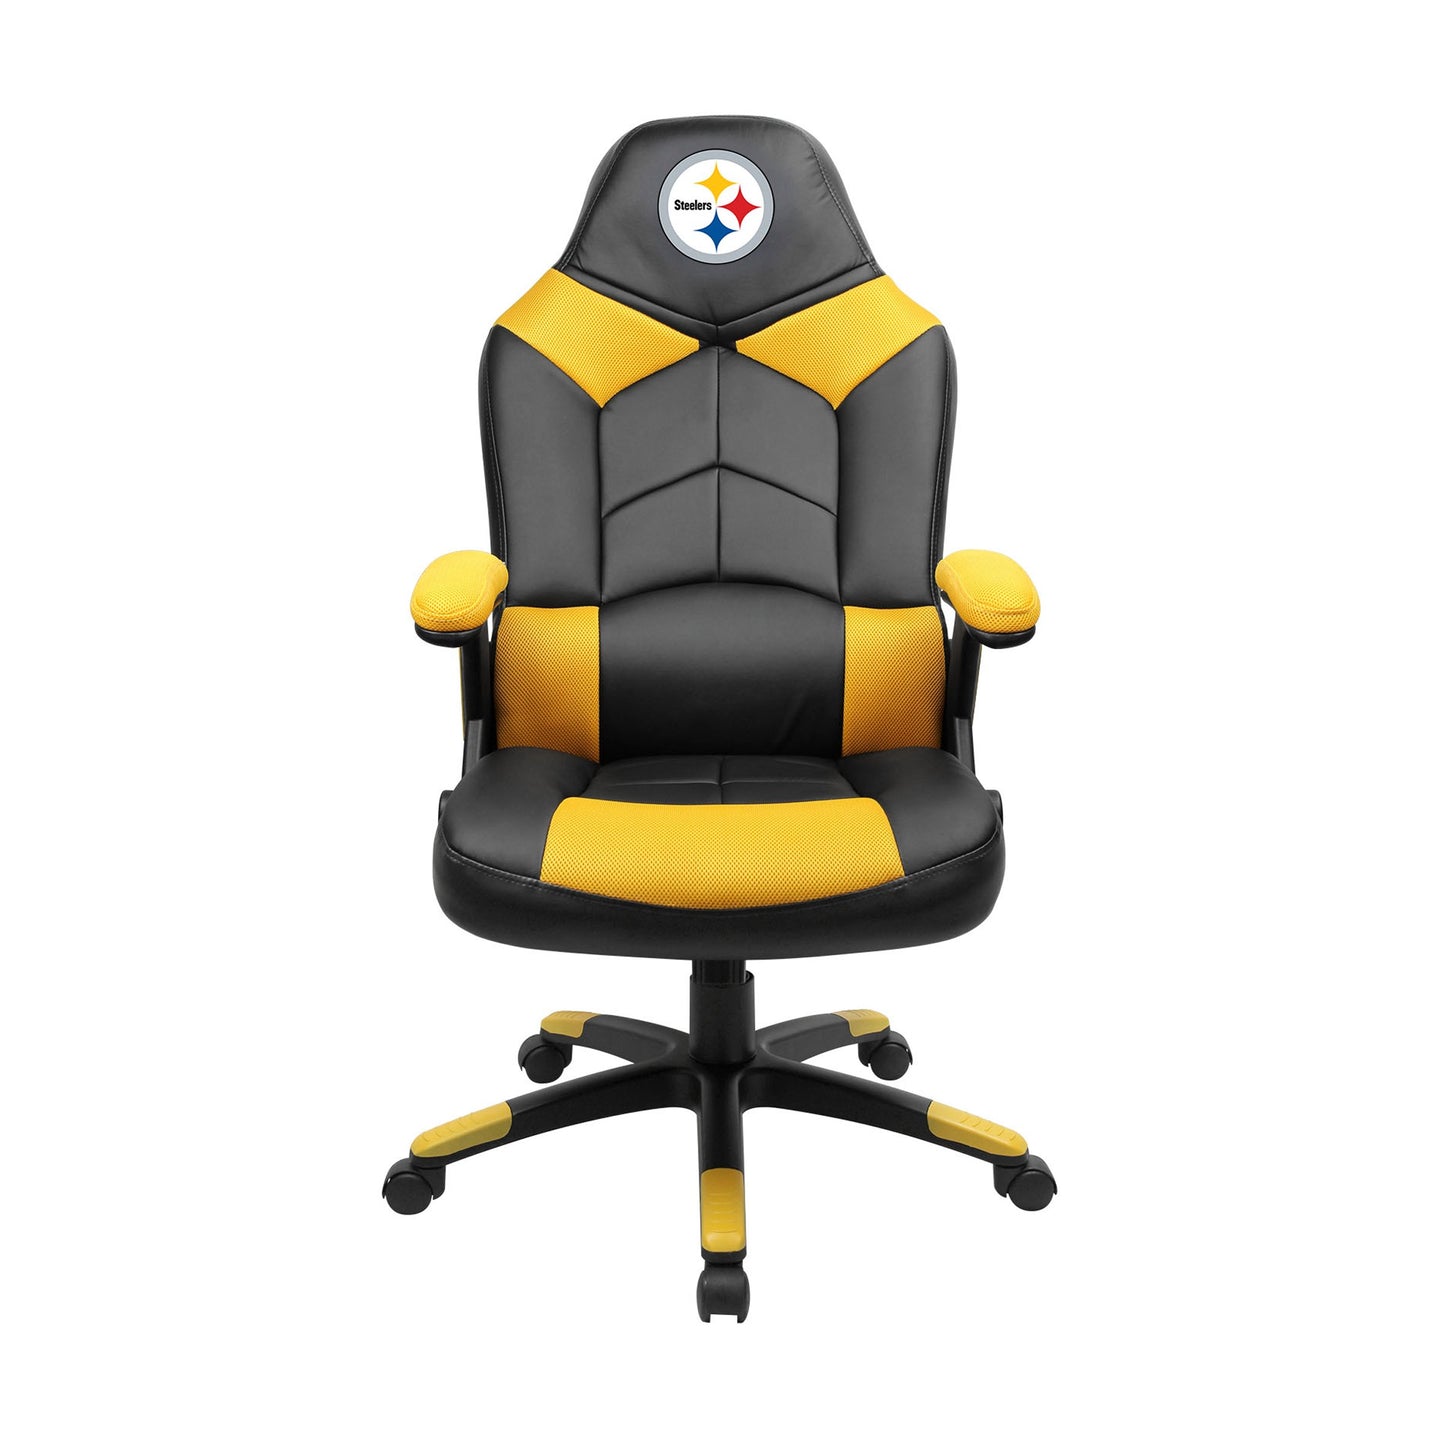 Pittsburgh Steelers Oversized Gaming Chair